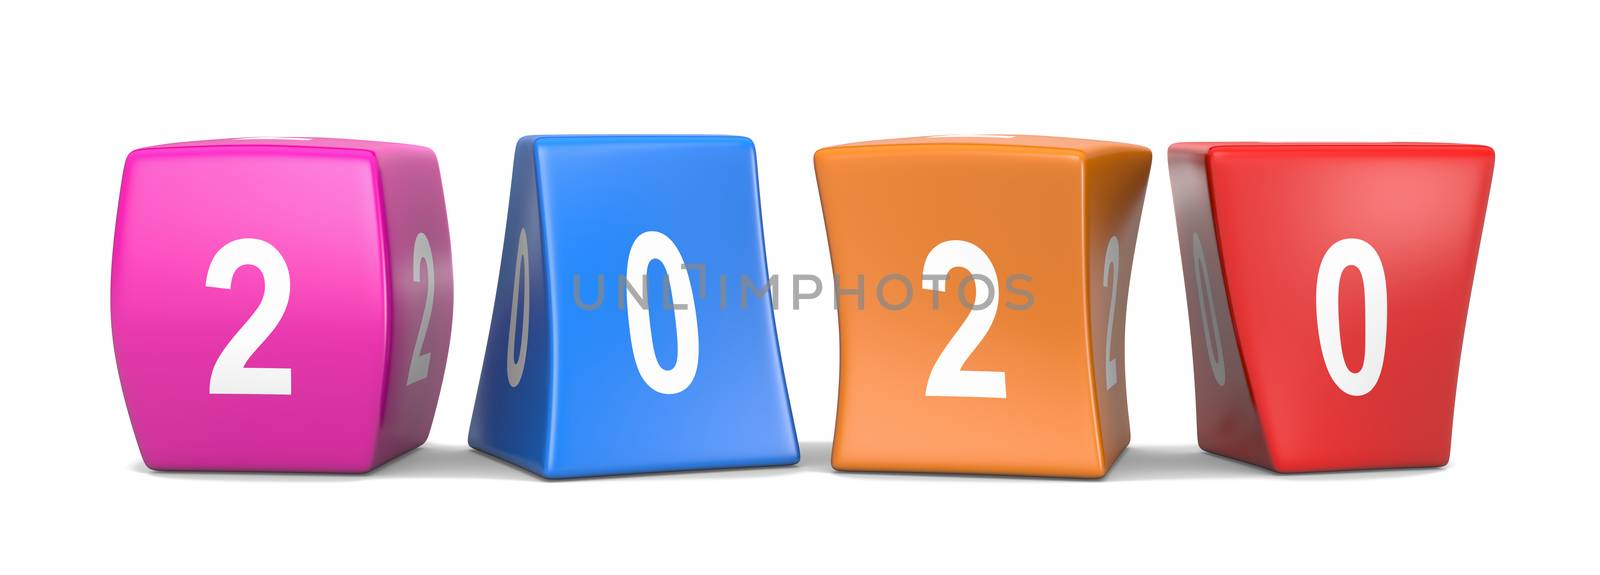 2020 White Text on Colorful Deformed Funny Cubes 3D Illustration on White Background